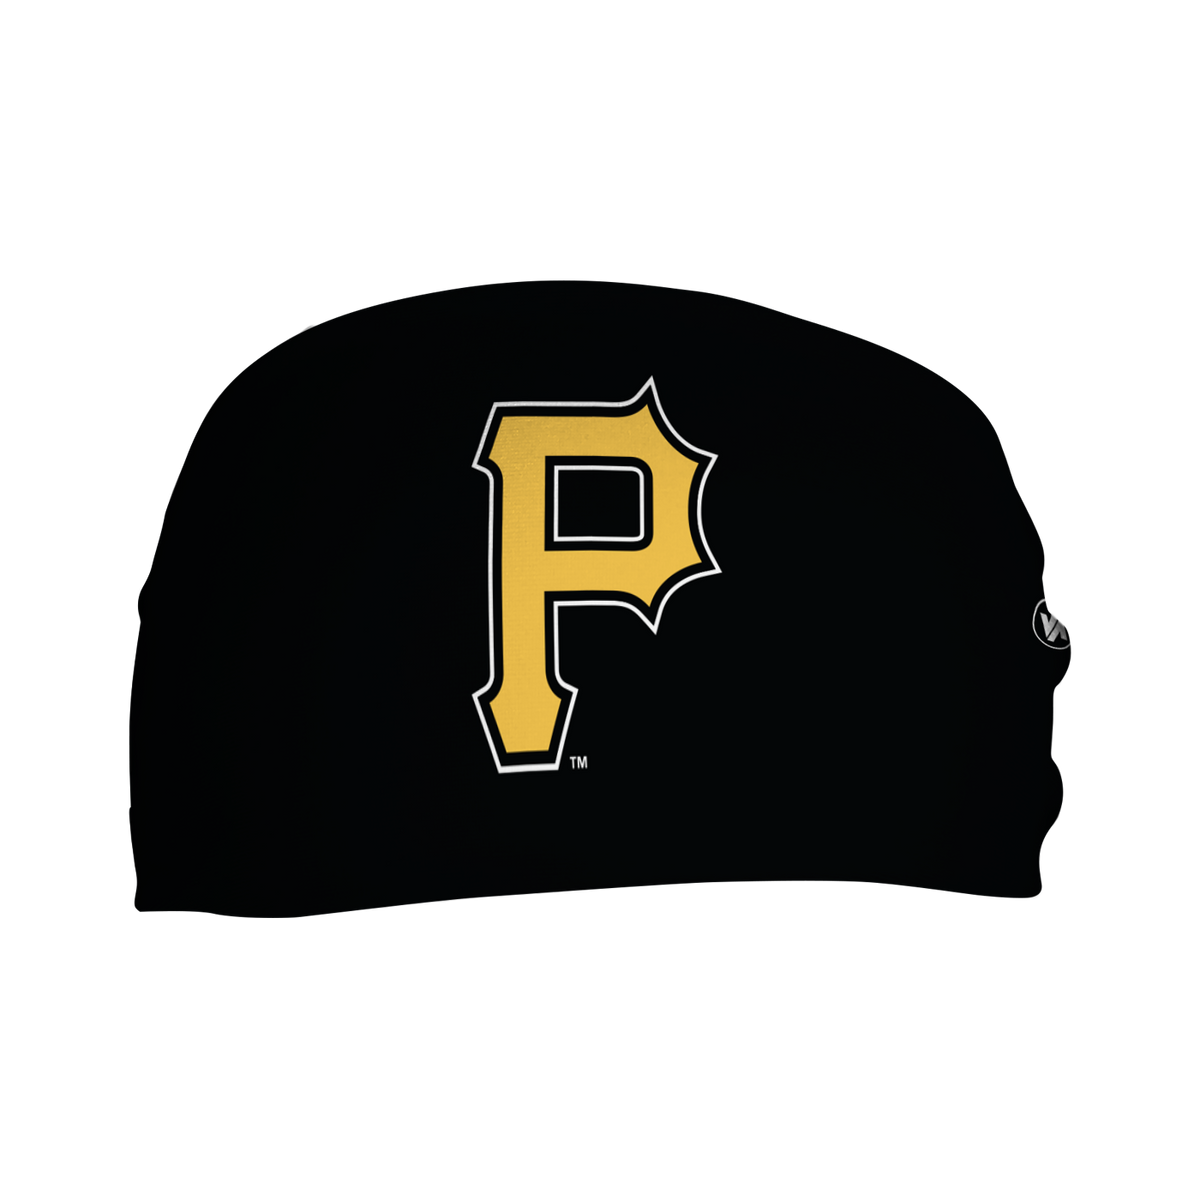 Official Pittsburgh Pirates Hats, Pirates Cap, Pirates Hats, Beanies